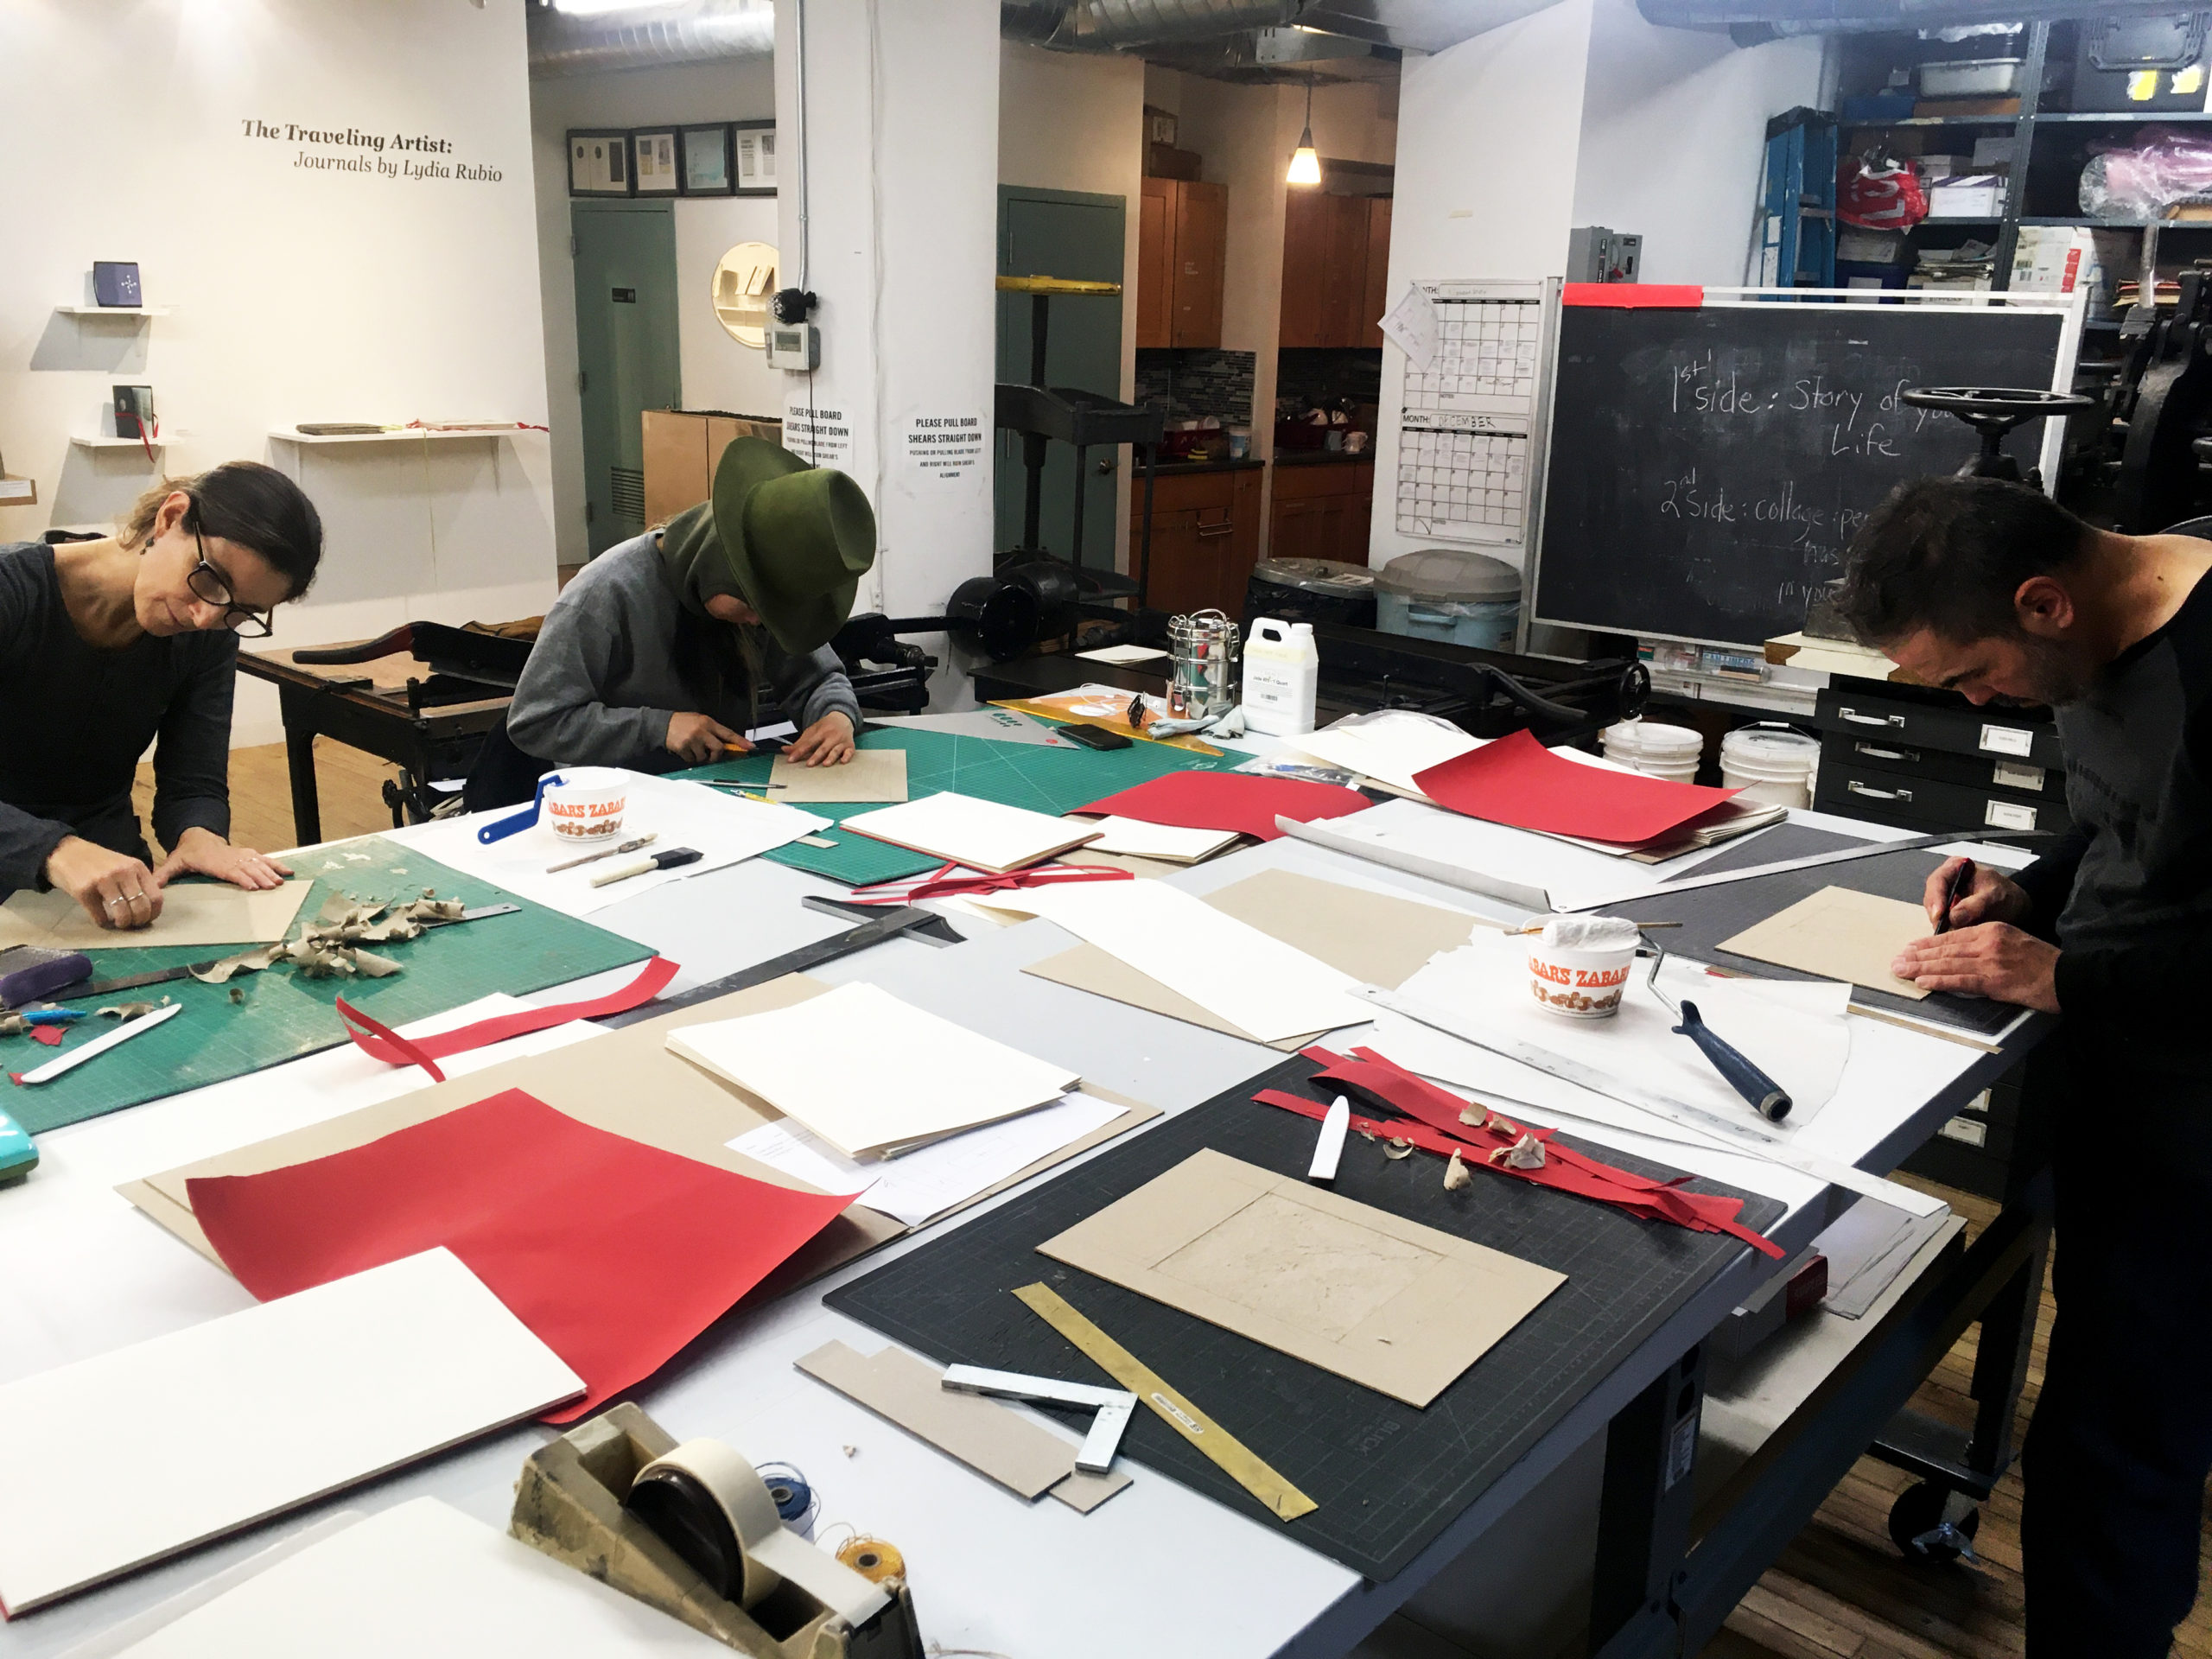 Three artists are cutting bookboard for an artists book. The table they're working at has supplies (paper, rulers, tape, etc) spread out all over it.